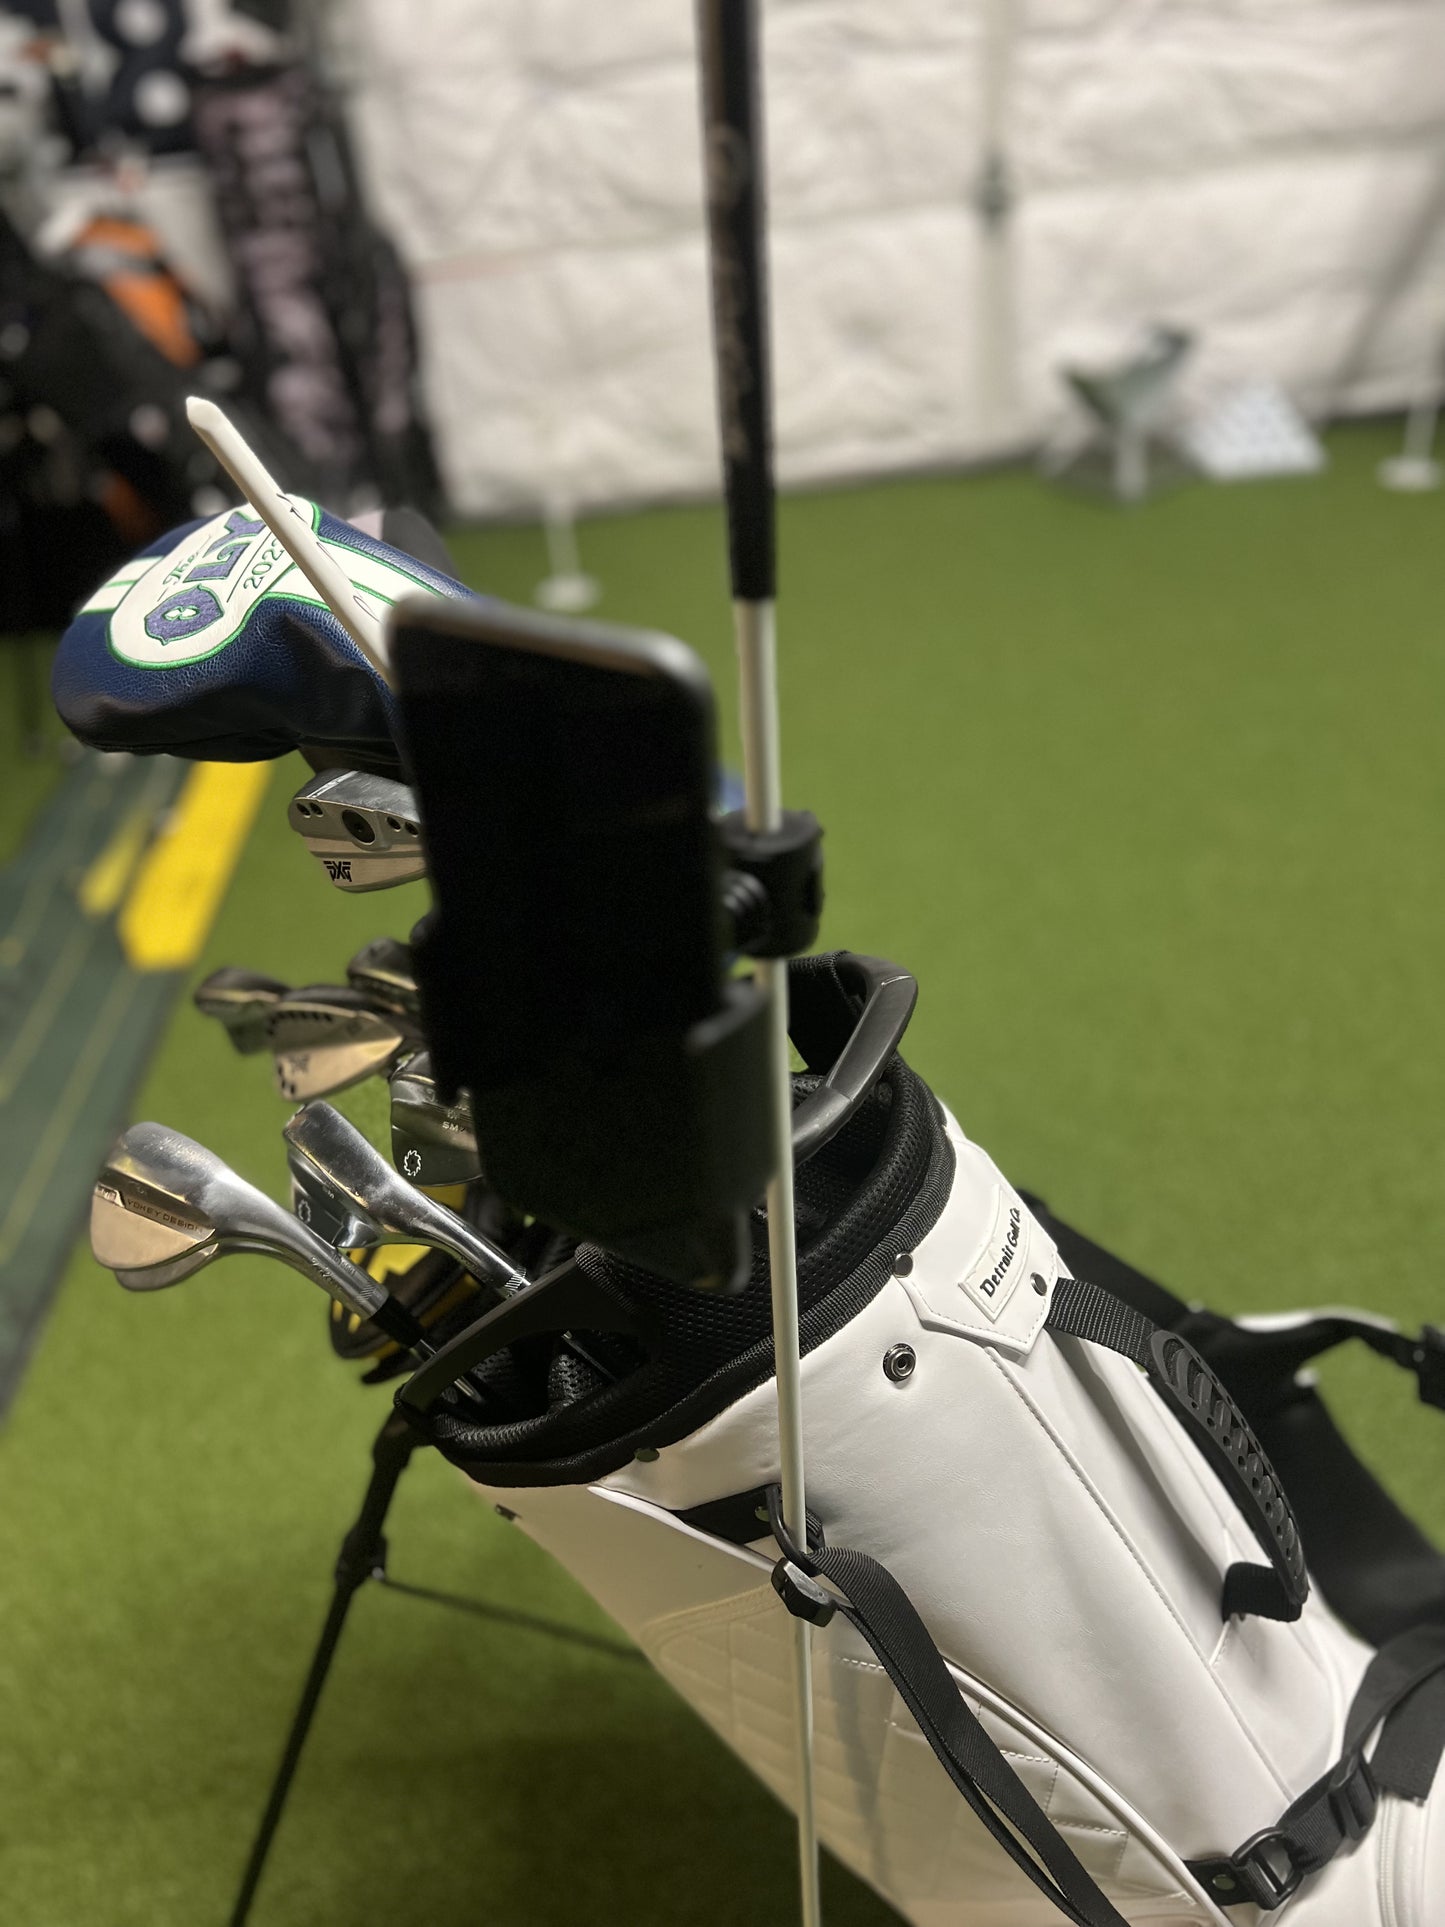 SnapStick - Mobile Phone Holder for Recording Golf Swing - Lightweight & Portable - Instant Feedback - Fits Phones up to 5.7" wide